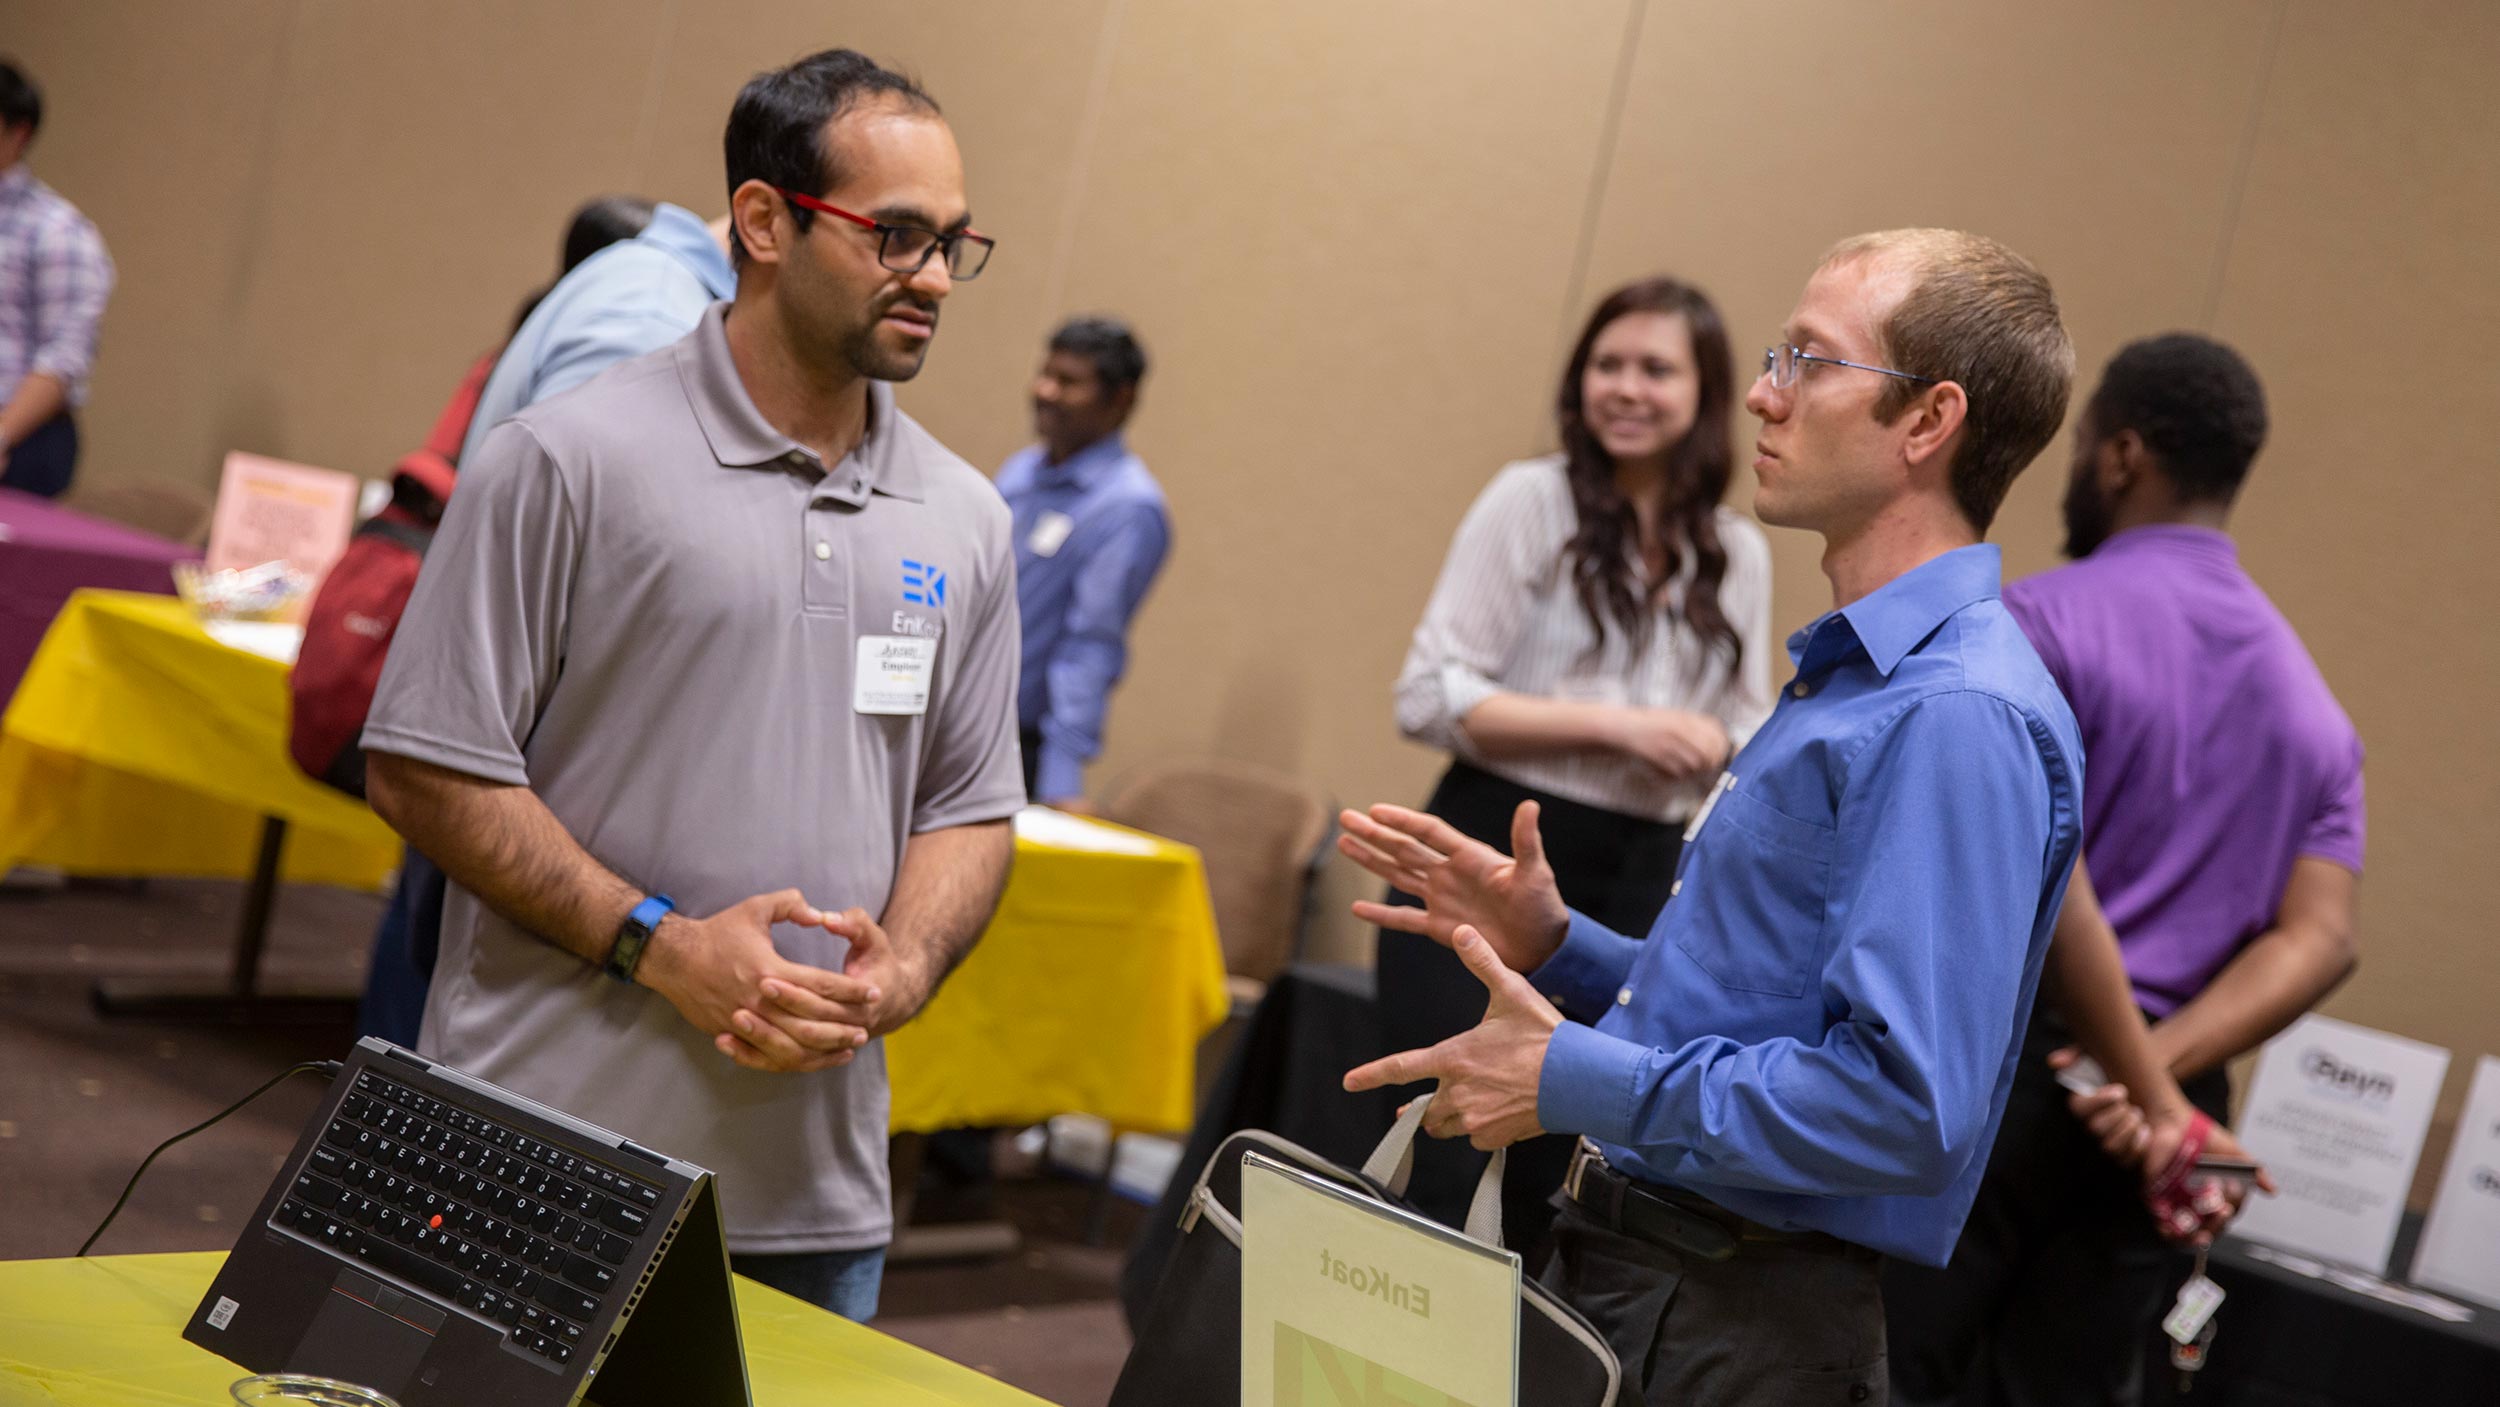 Man speaking to another man at a career fair